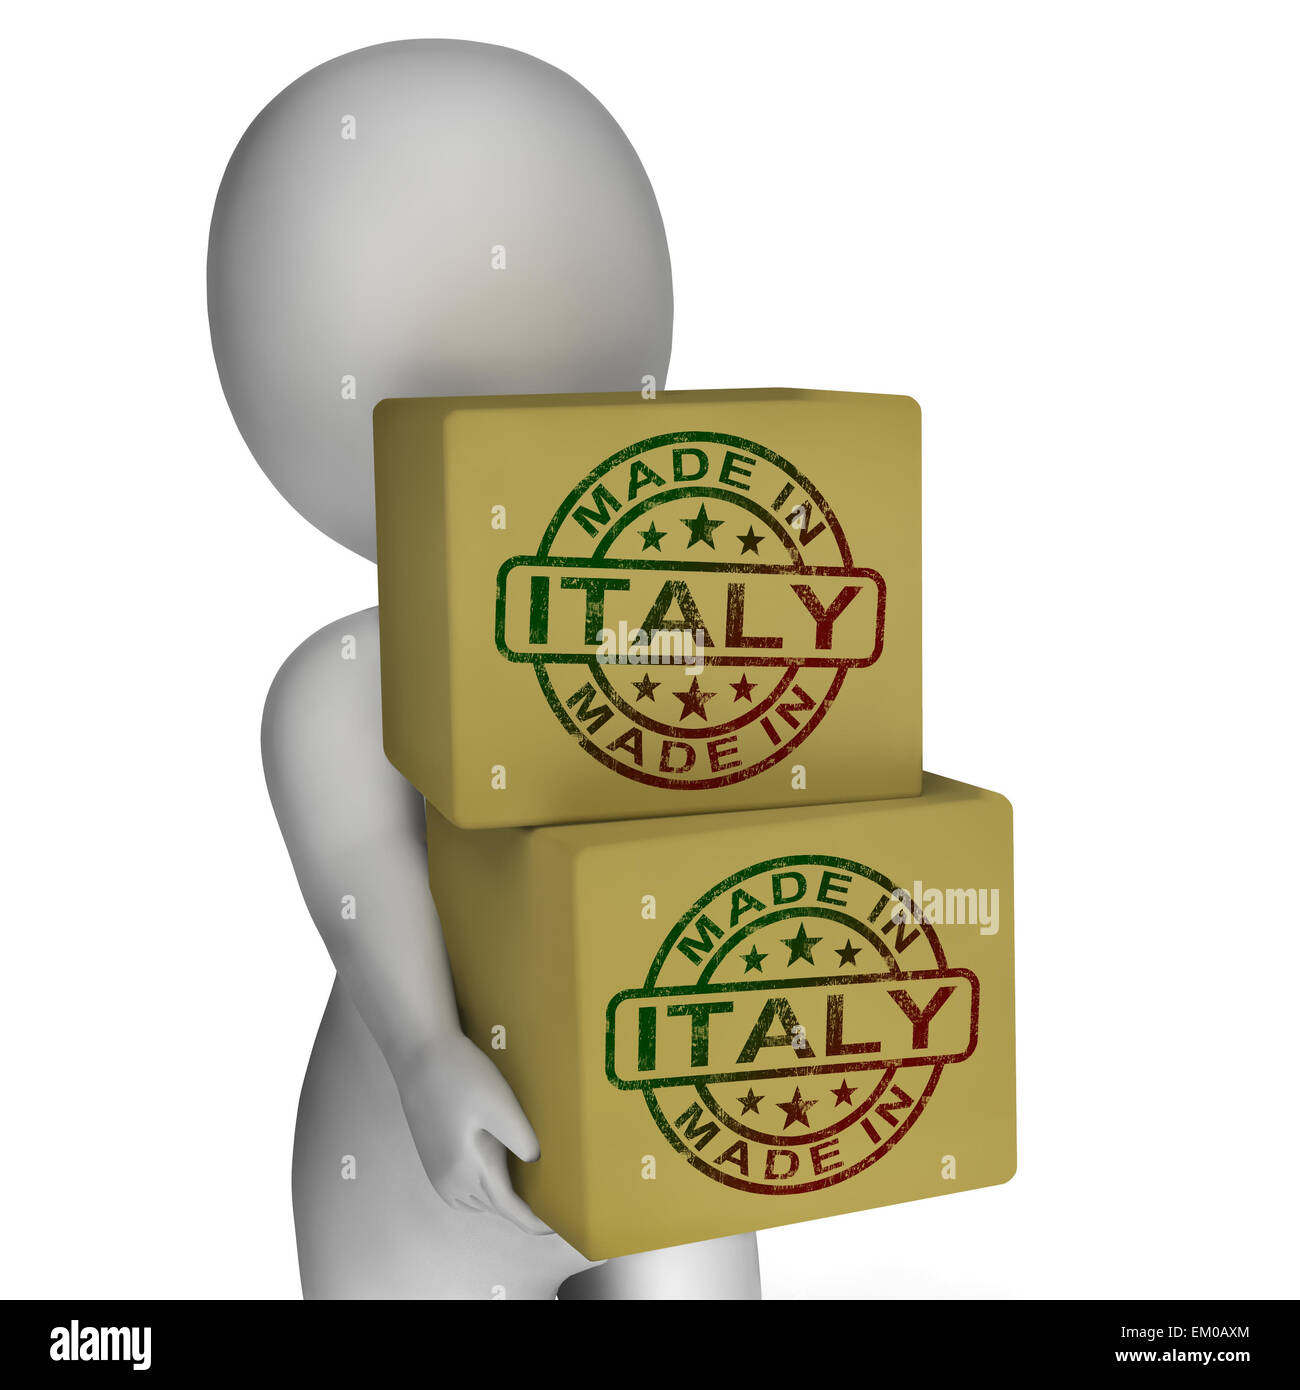 Made In Italy Stamp On Boxes Shows Italian Products Stock Photo